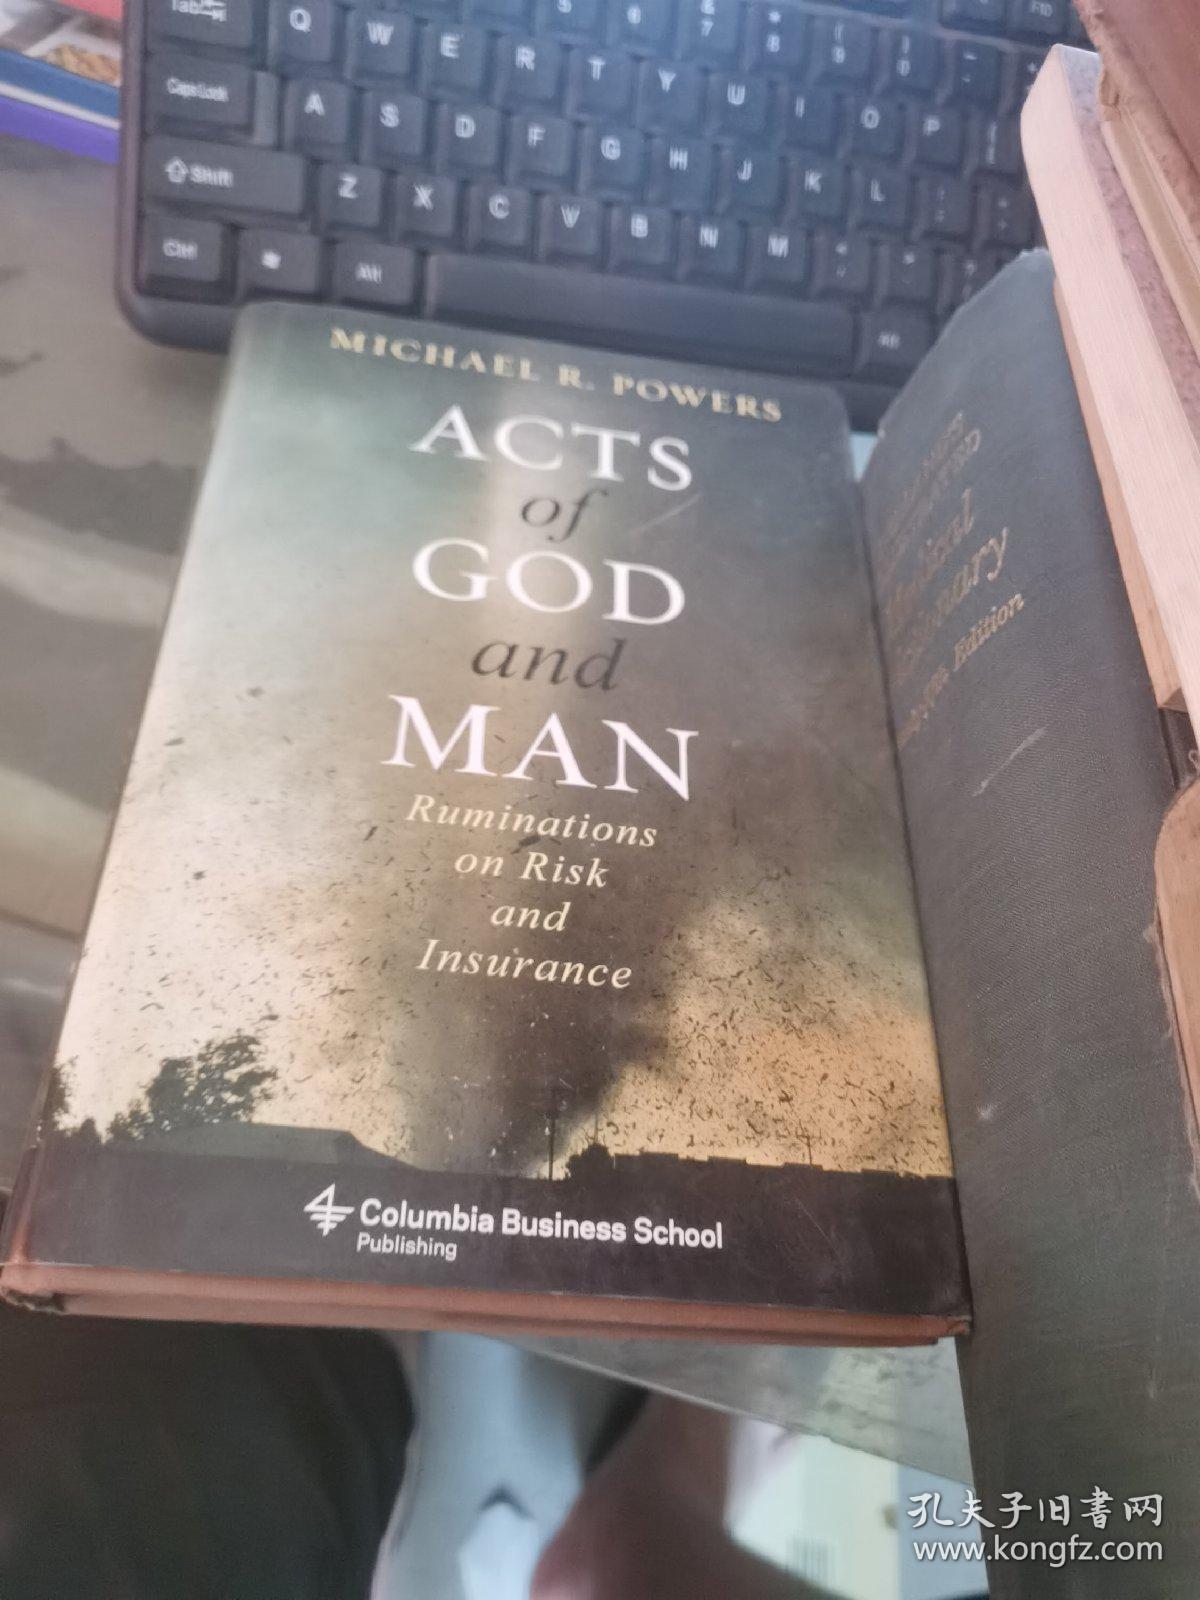 ACTS OF GOD AND MAN